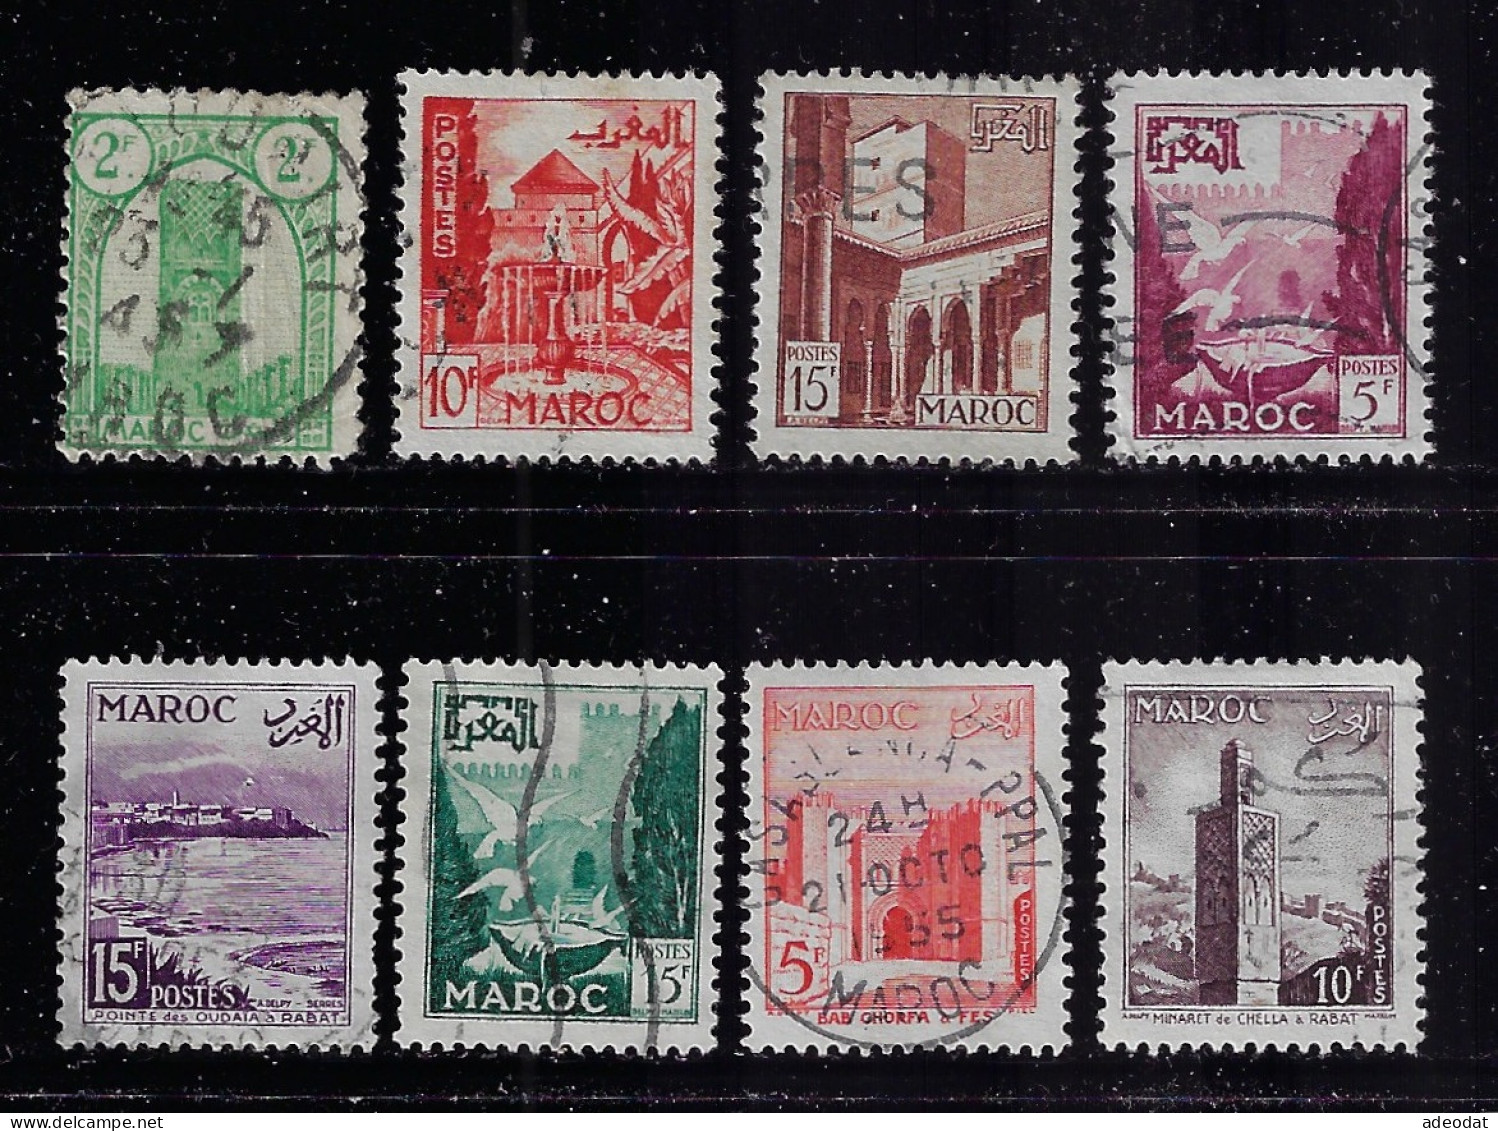 FRENCH MOROCCO 1943-1953 SCOTT 188,251,276,277,299,35,316,371 STAMPS CANCELLED - Oblitérés